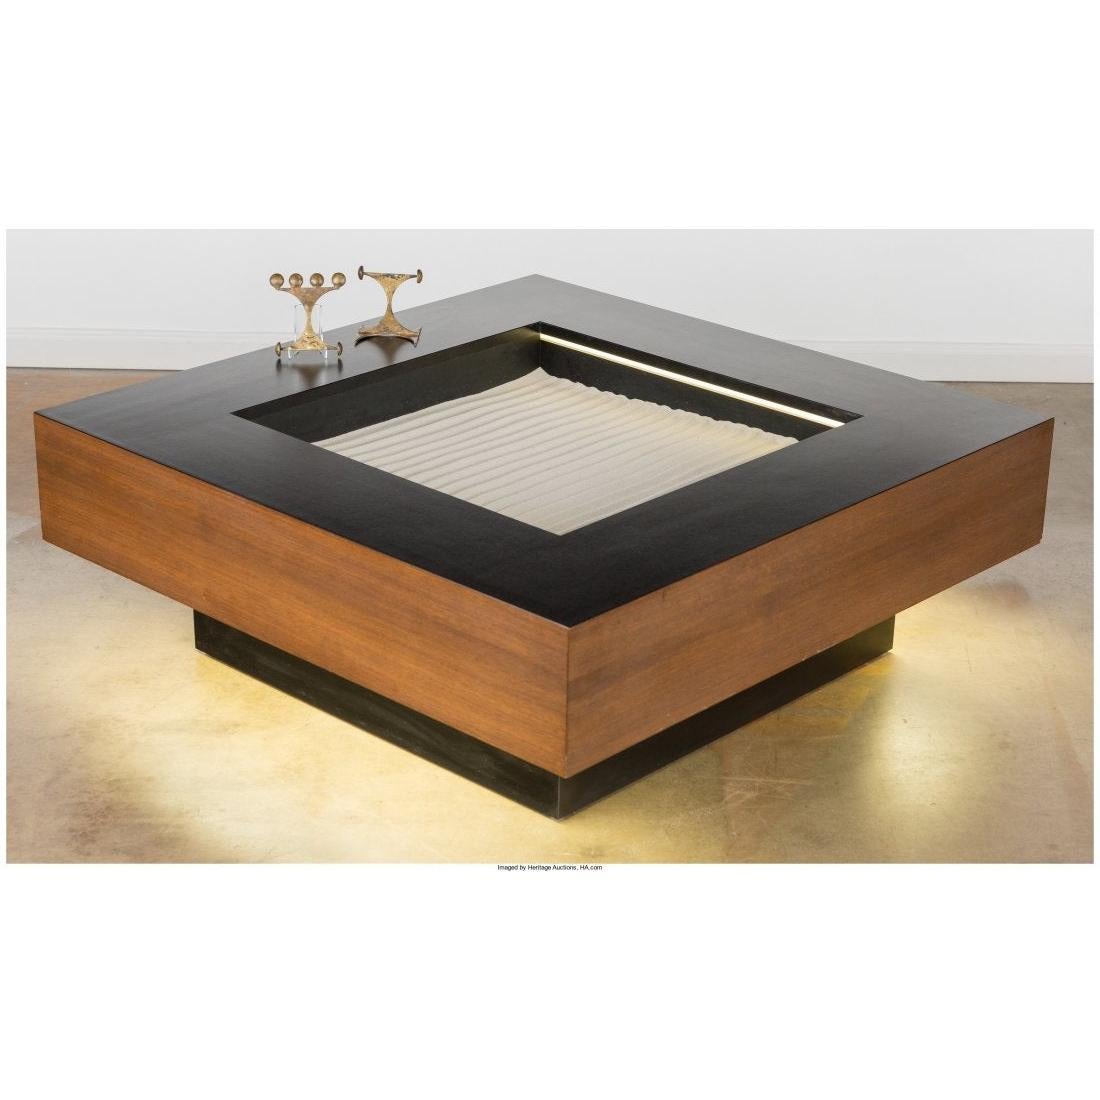 An incredible coffee table by Hugh Spencer, designed and created in the 1960s this table was made for the executive office to provide a bit of zen throughout the work day.  Included are 2 brutalist styled tools that allow you to rake and groom the